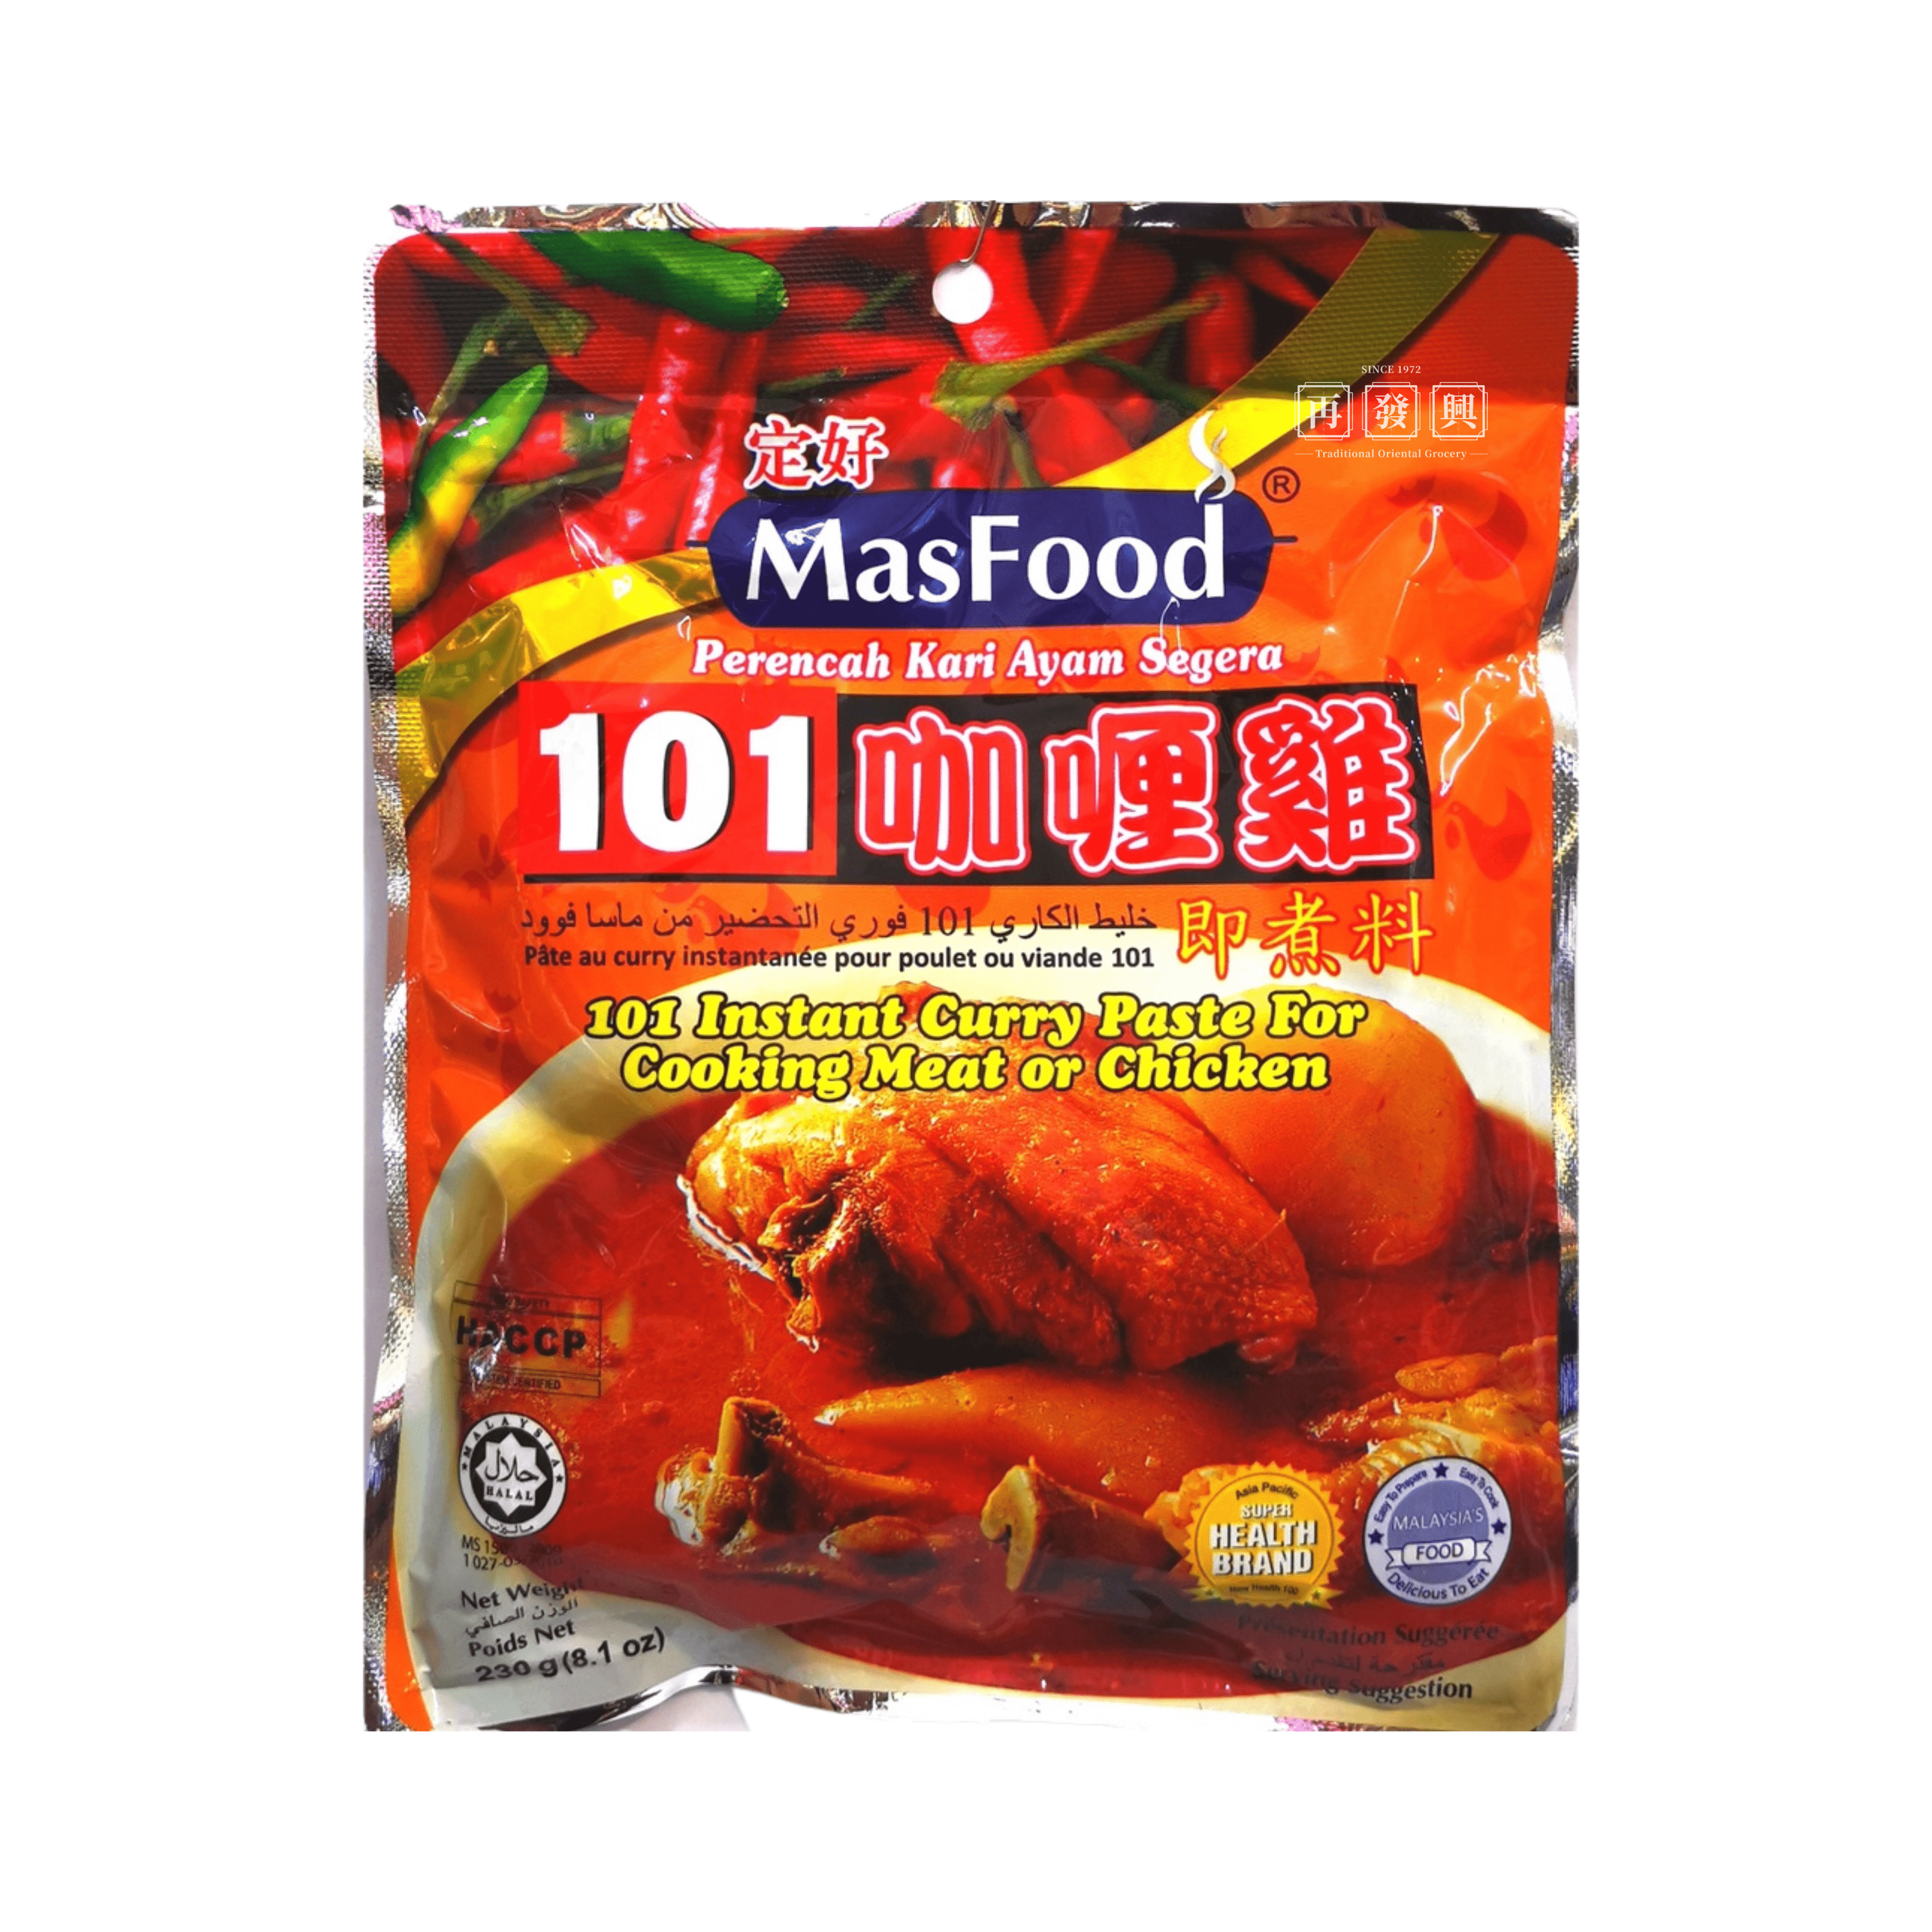 MasFood 101 Instant Curry Paste 230g